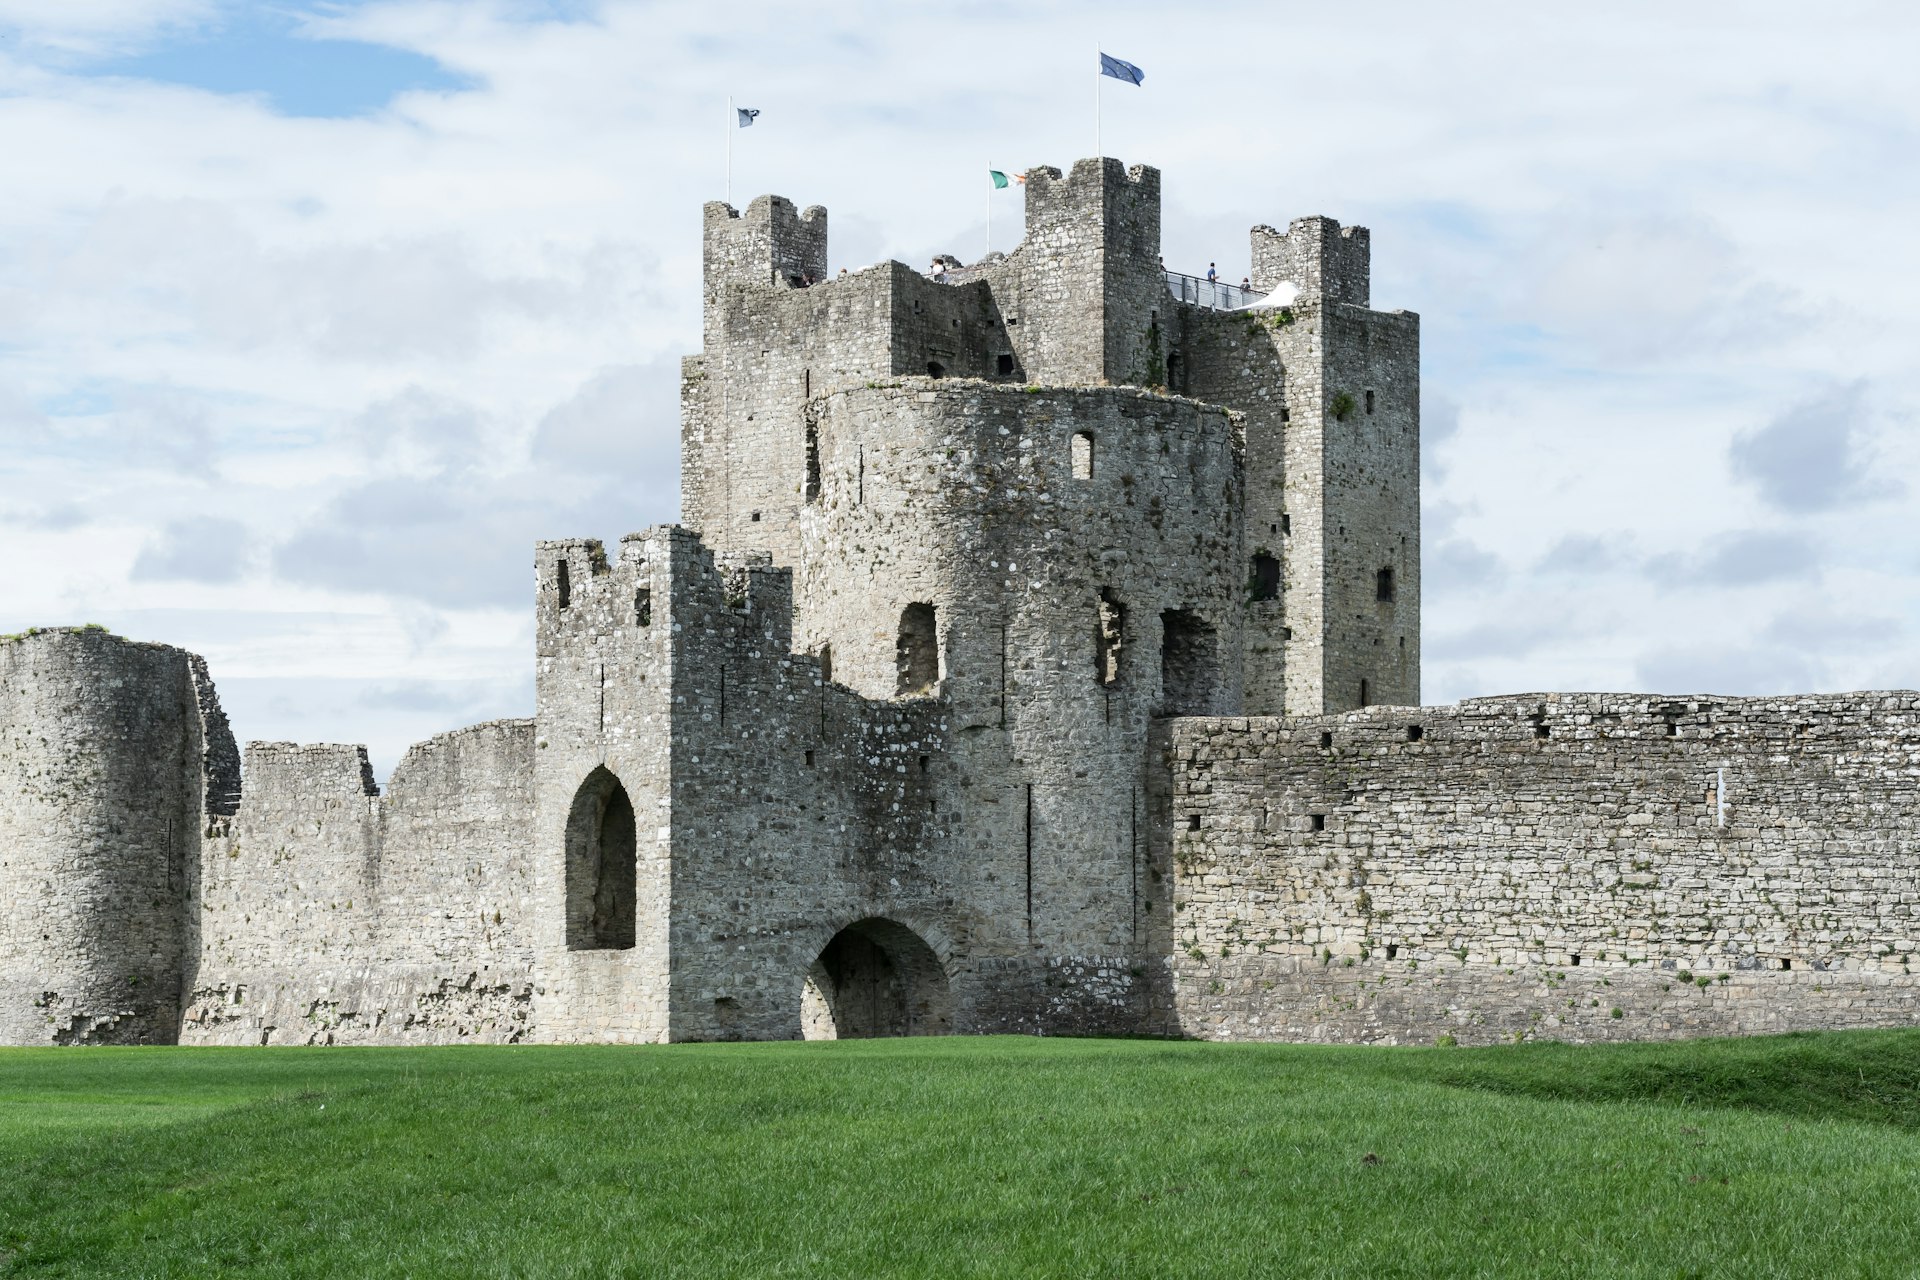 Trim Castle by the banks of the Rover Boyne